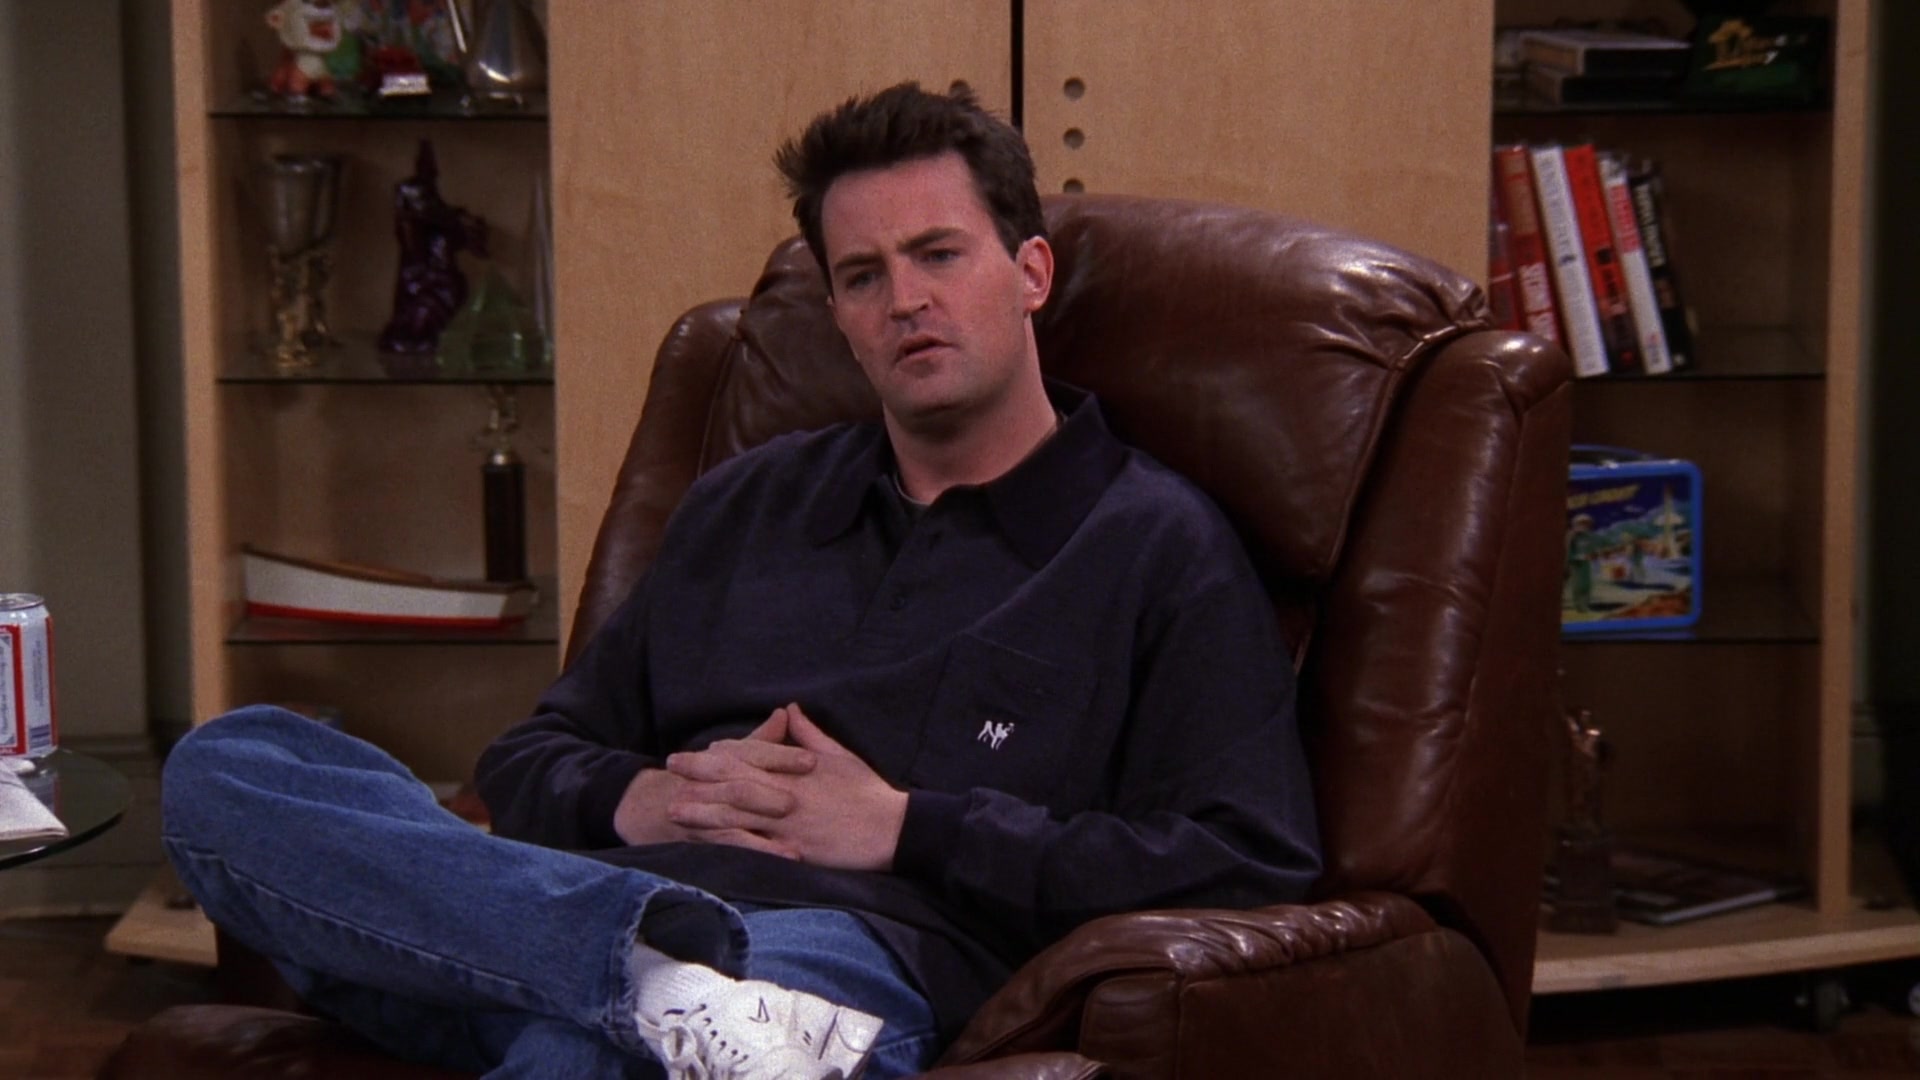 (Chandler Bing) in Friends Season 5 Episode 12 "The One with Chandler’...